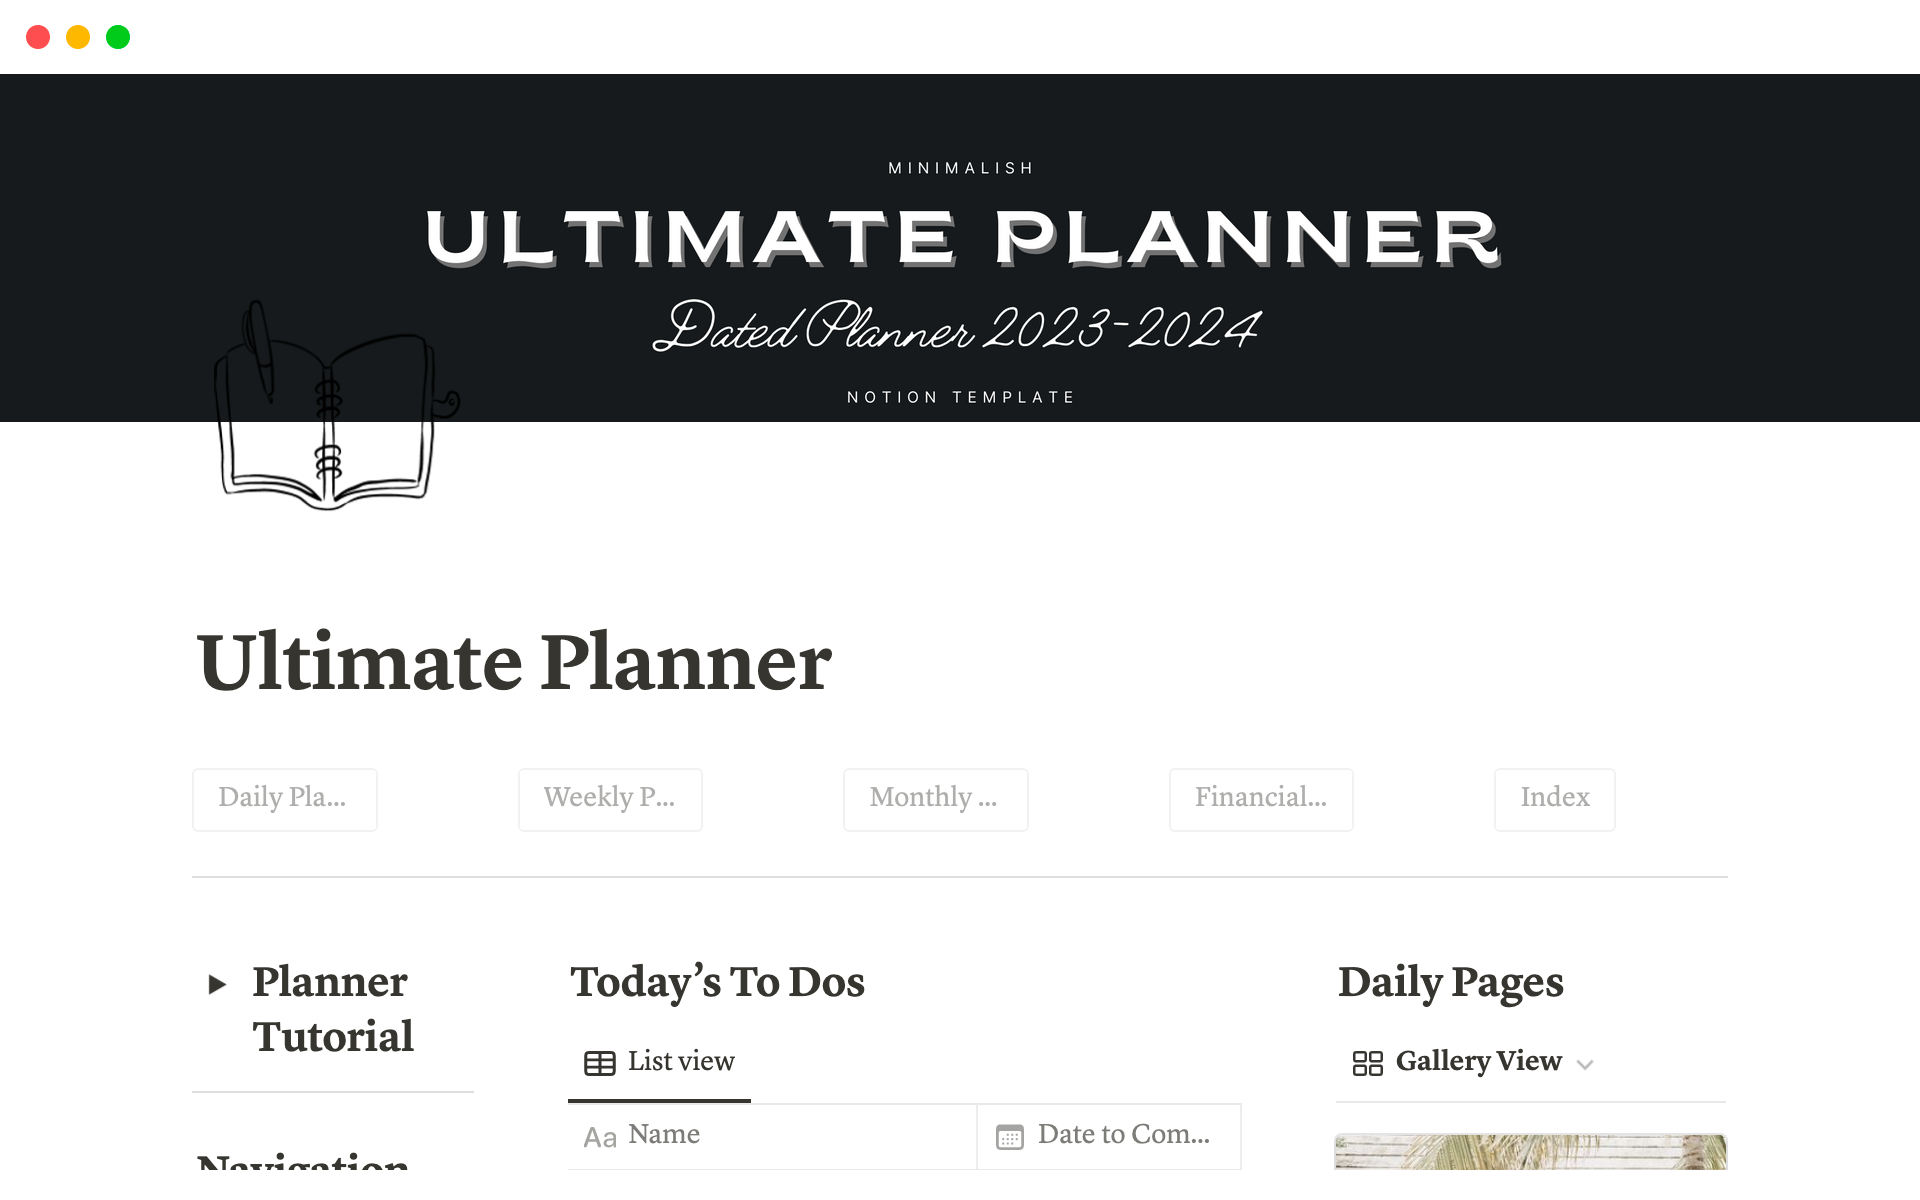 Ultimate digital planner with 12 hubs for planning your entire life.